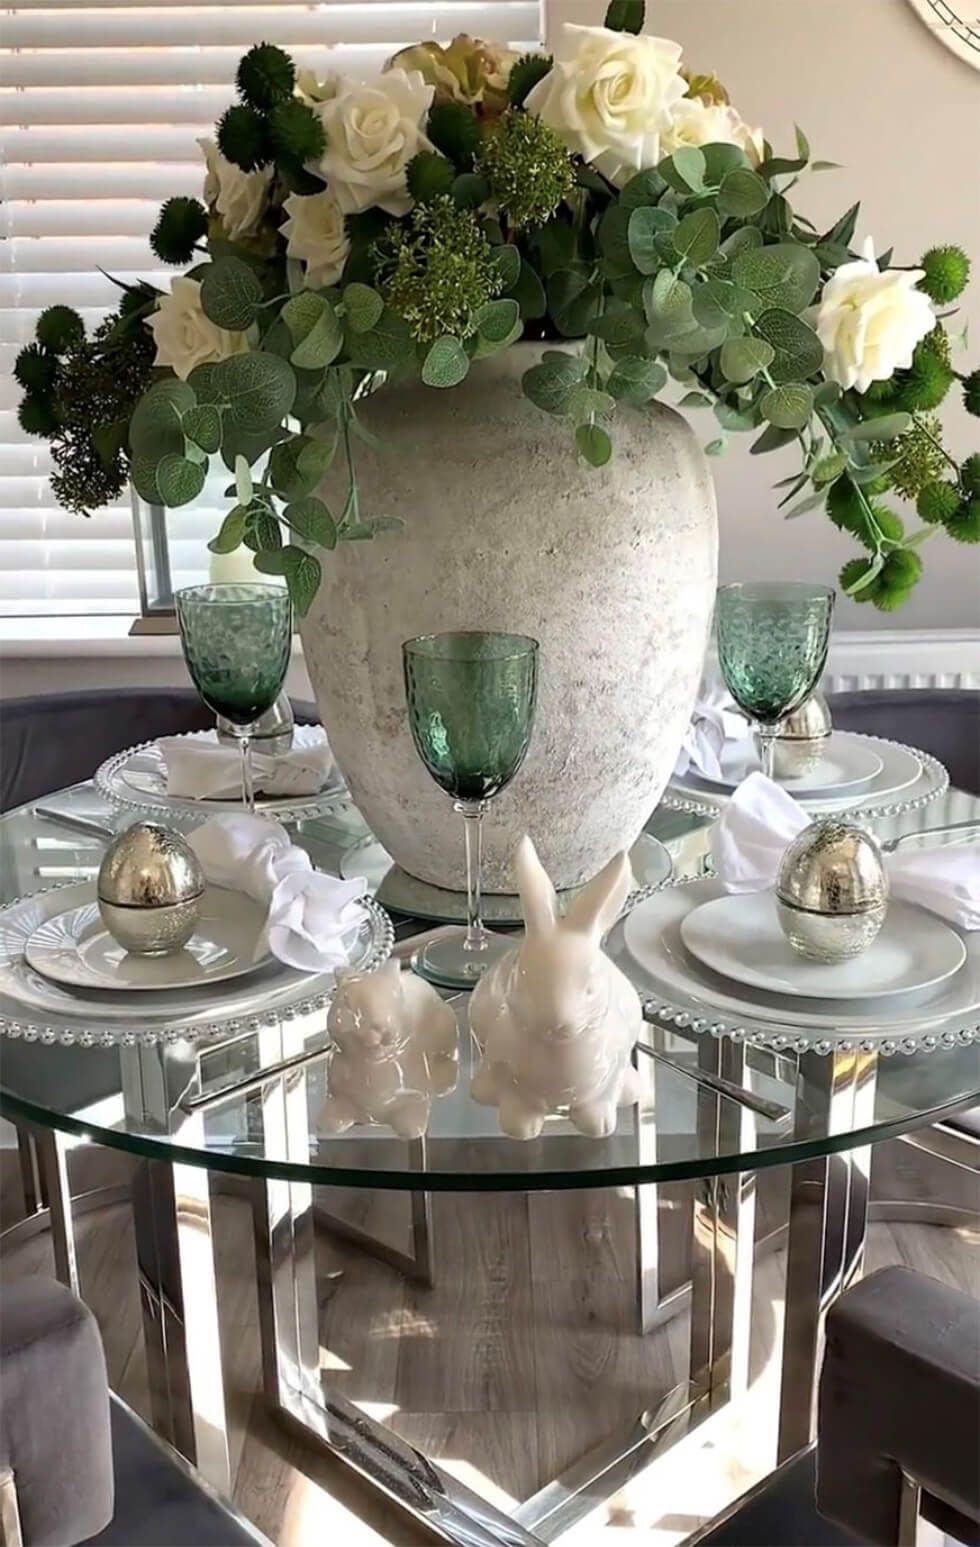  A glass and chrome dining set with a stylish tablescape